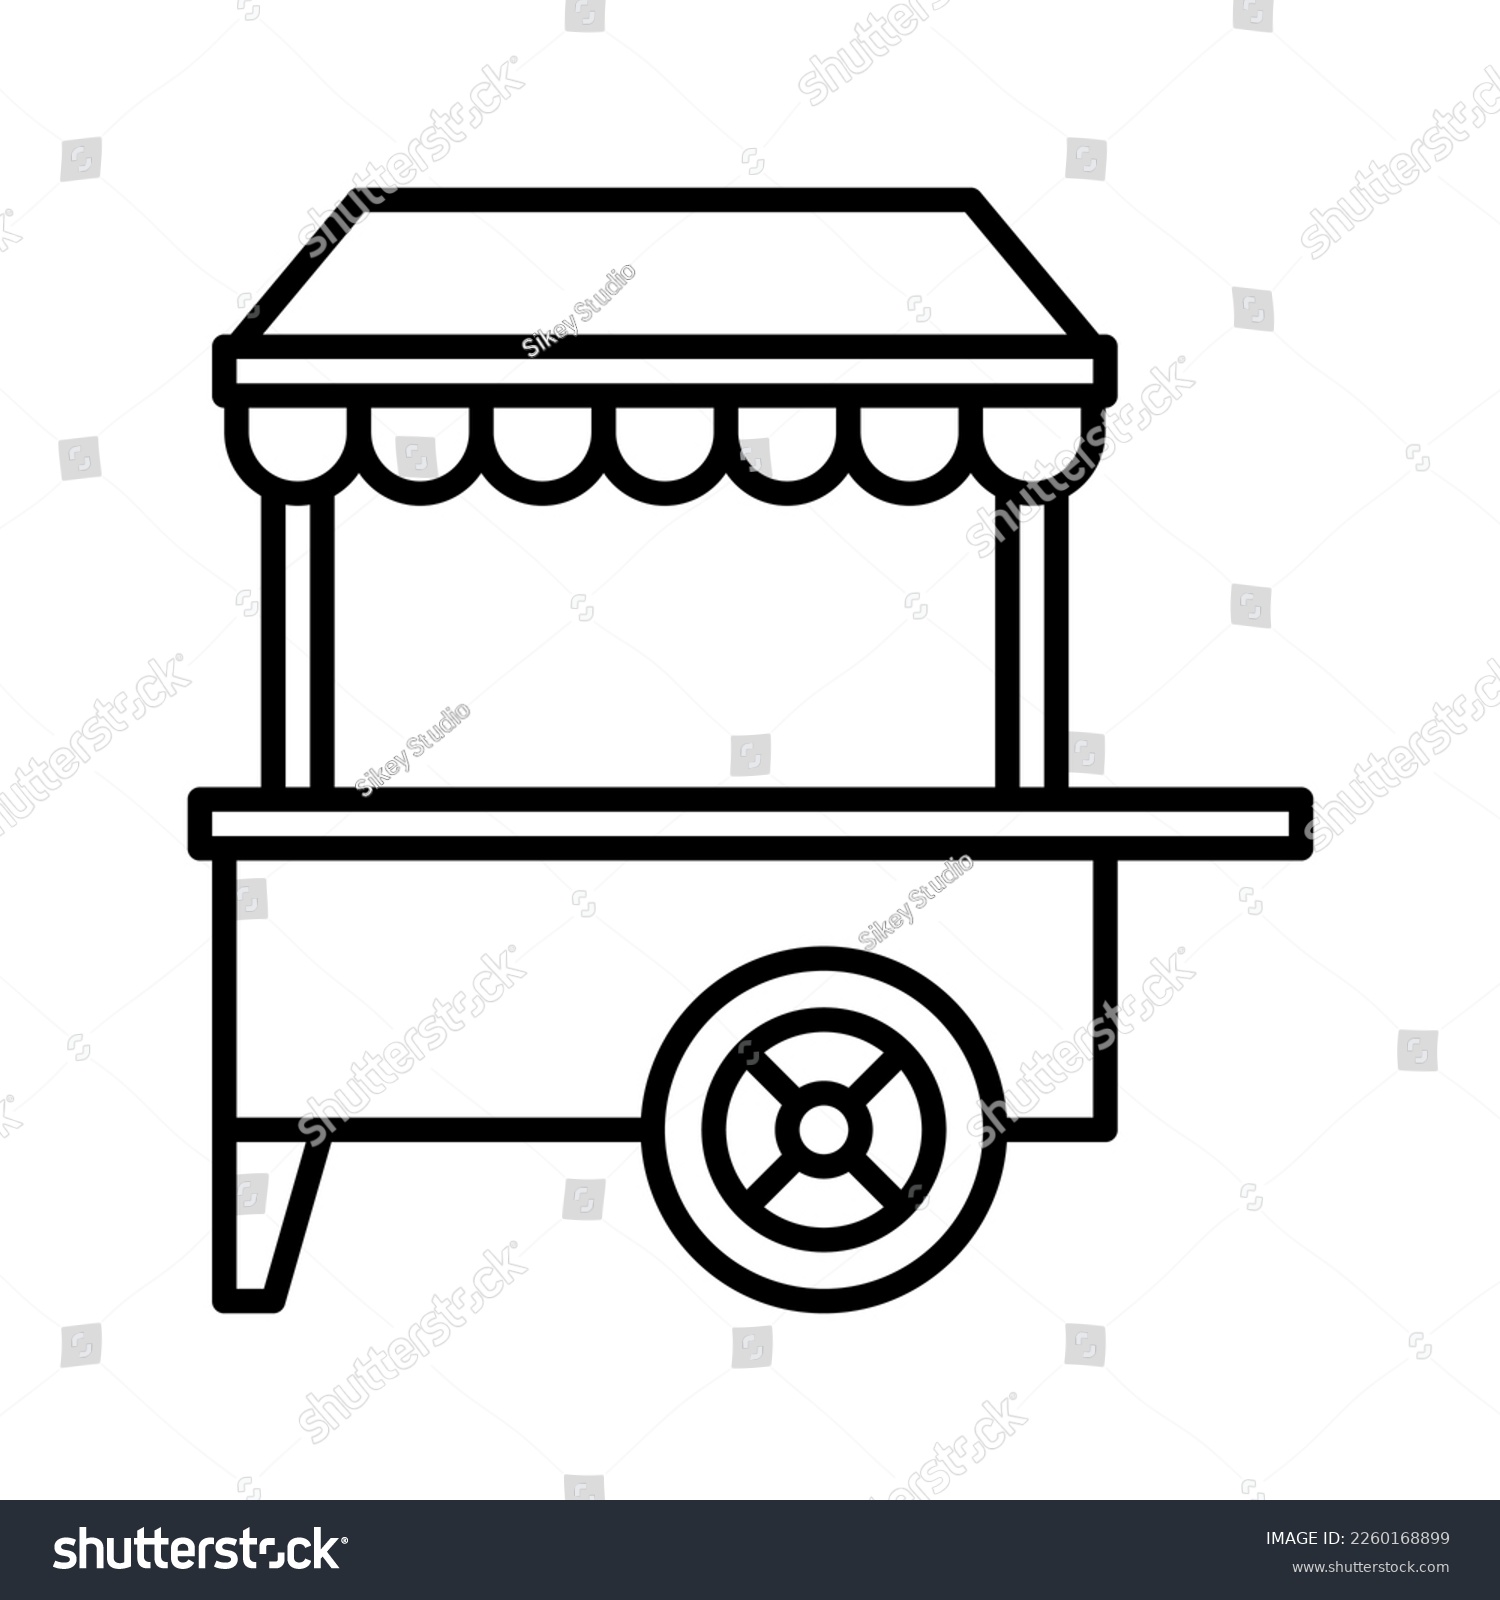 SVG of this is a food cart icon
icon with outline style and pixel perfect
this is one of the icons from the icon sets with Circus theme svg